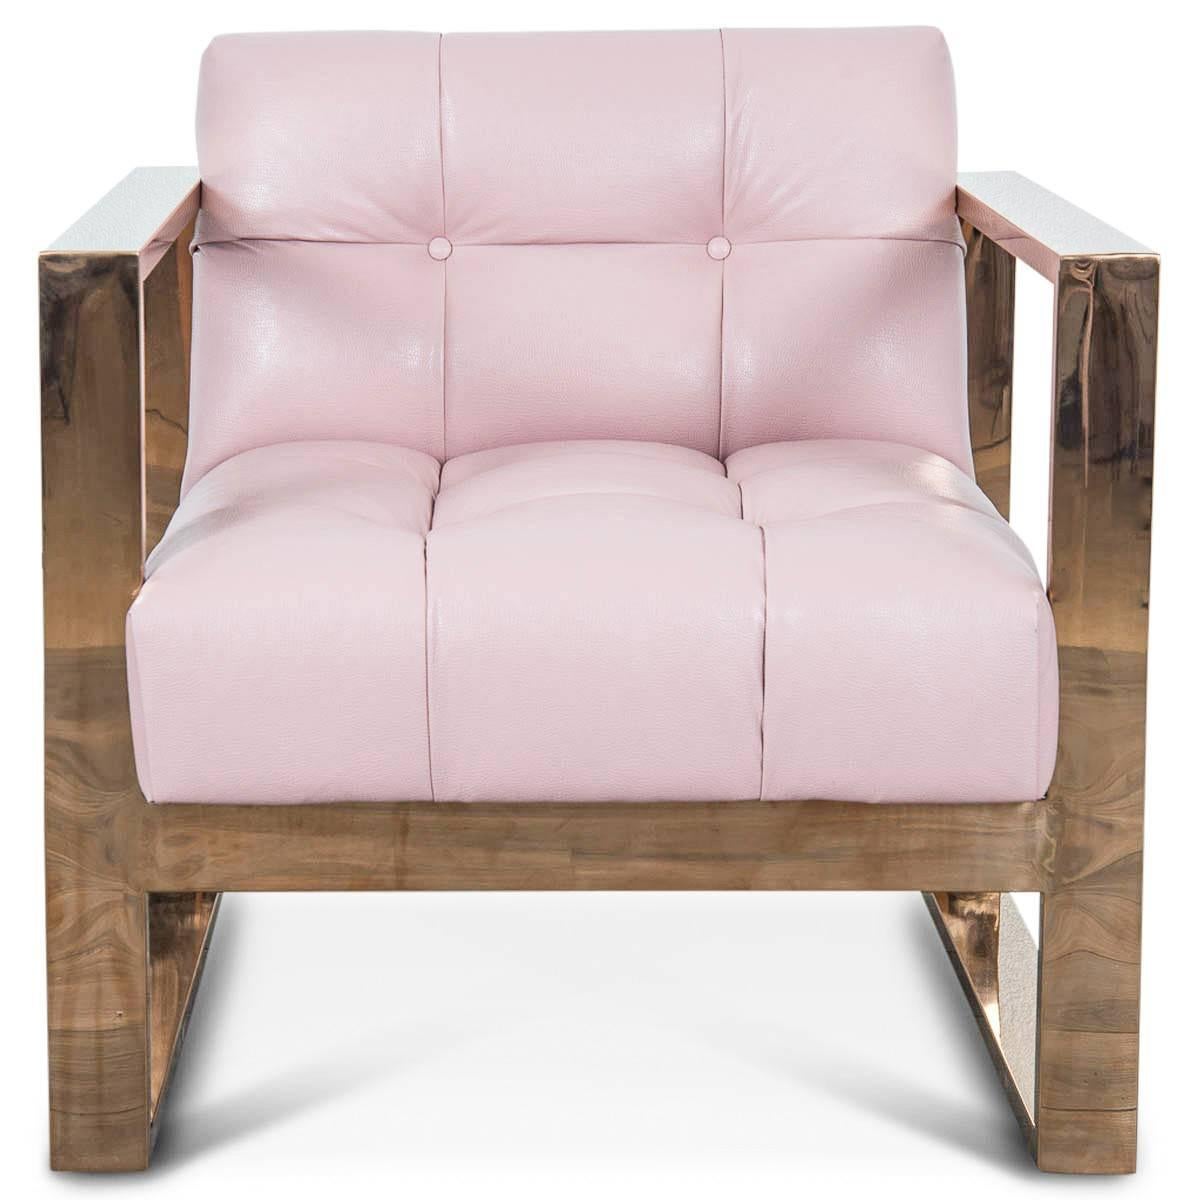 A geometric form melds with the all tufted back and seat to create this wonderfully comfortable yet striking chair. Finished in blush faux leather and rose gold frame. It's masculine and feminine at the same time.

Dimension:

31.5